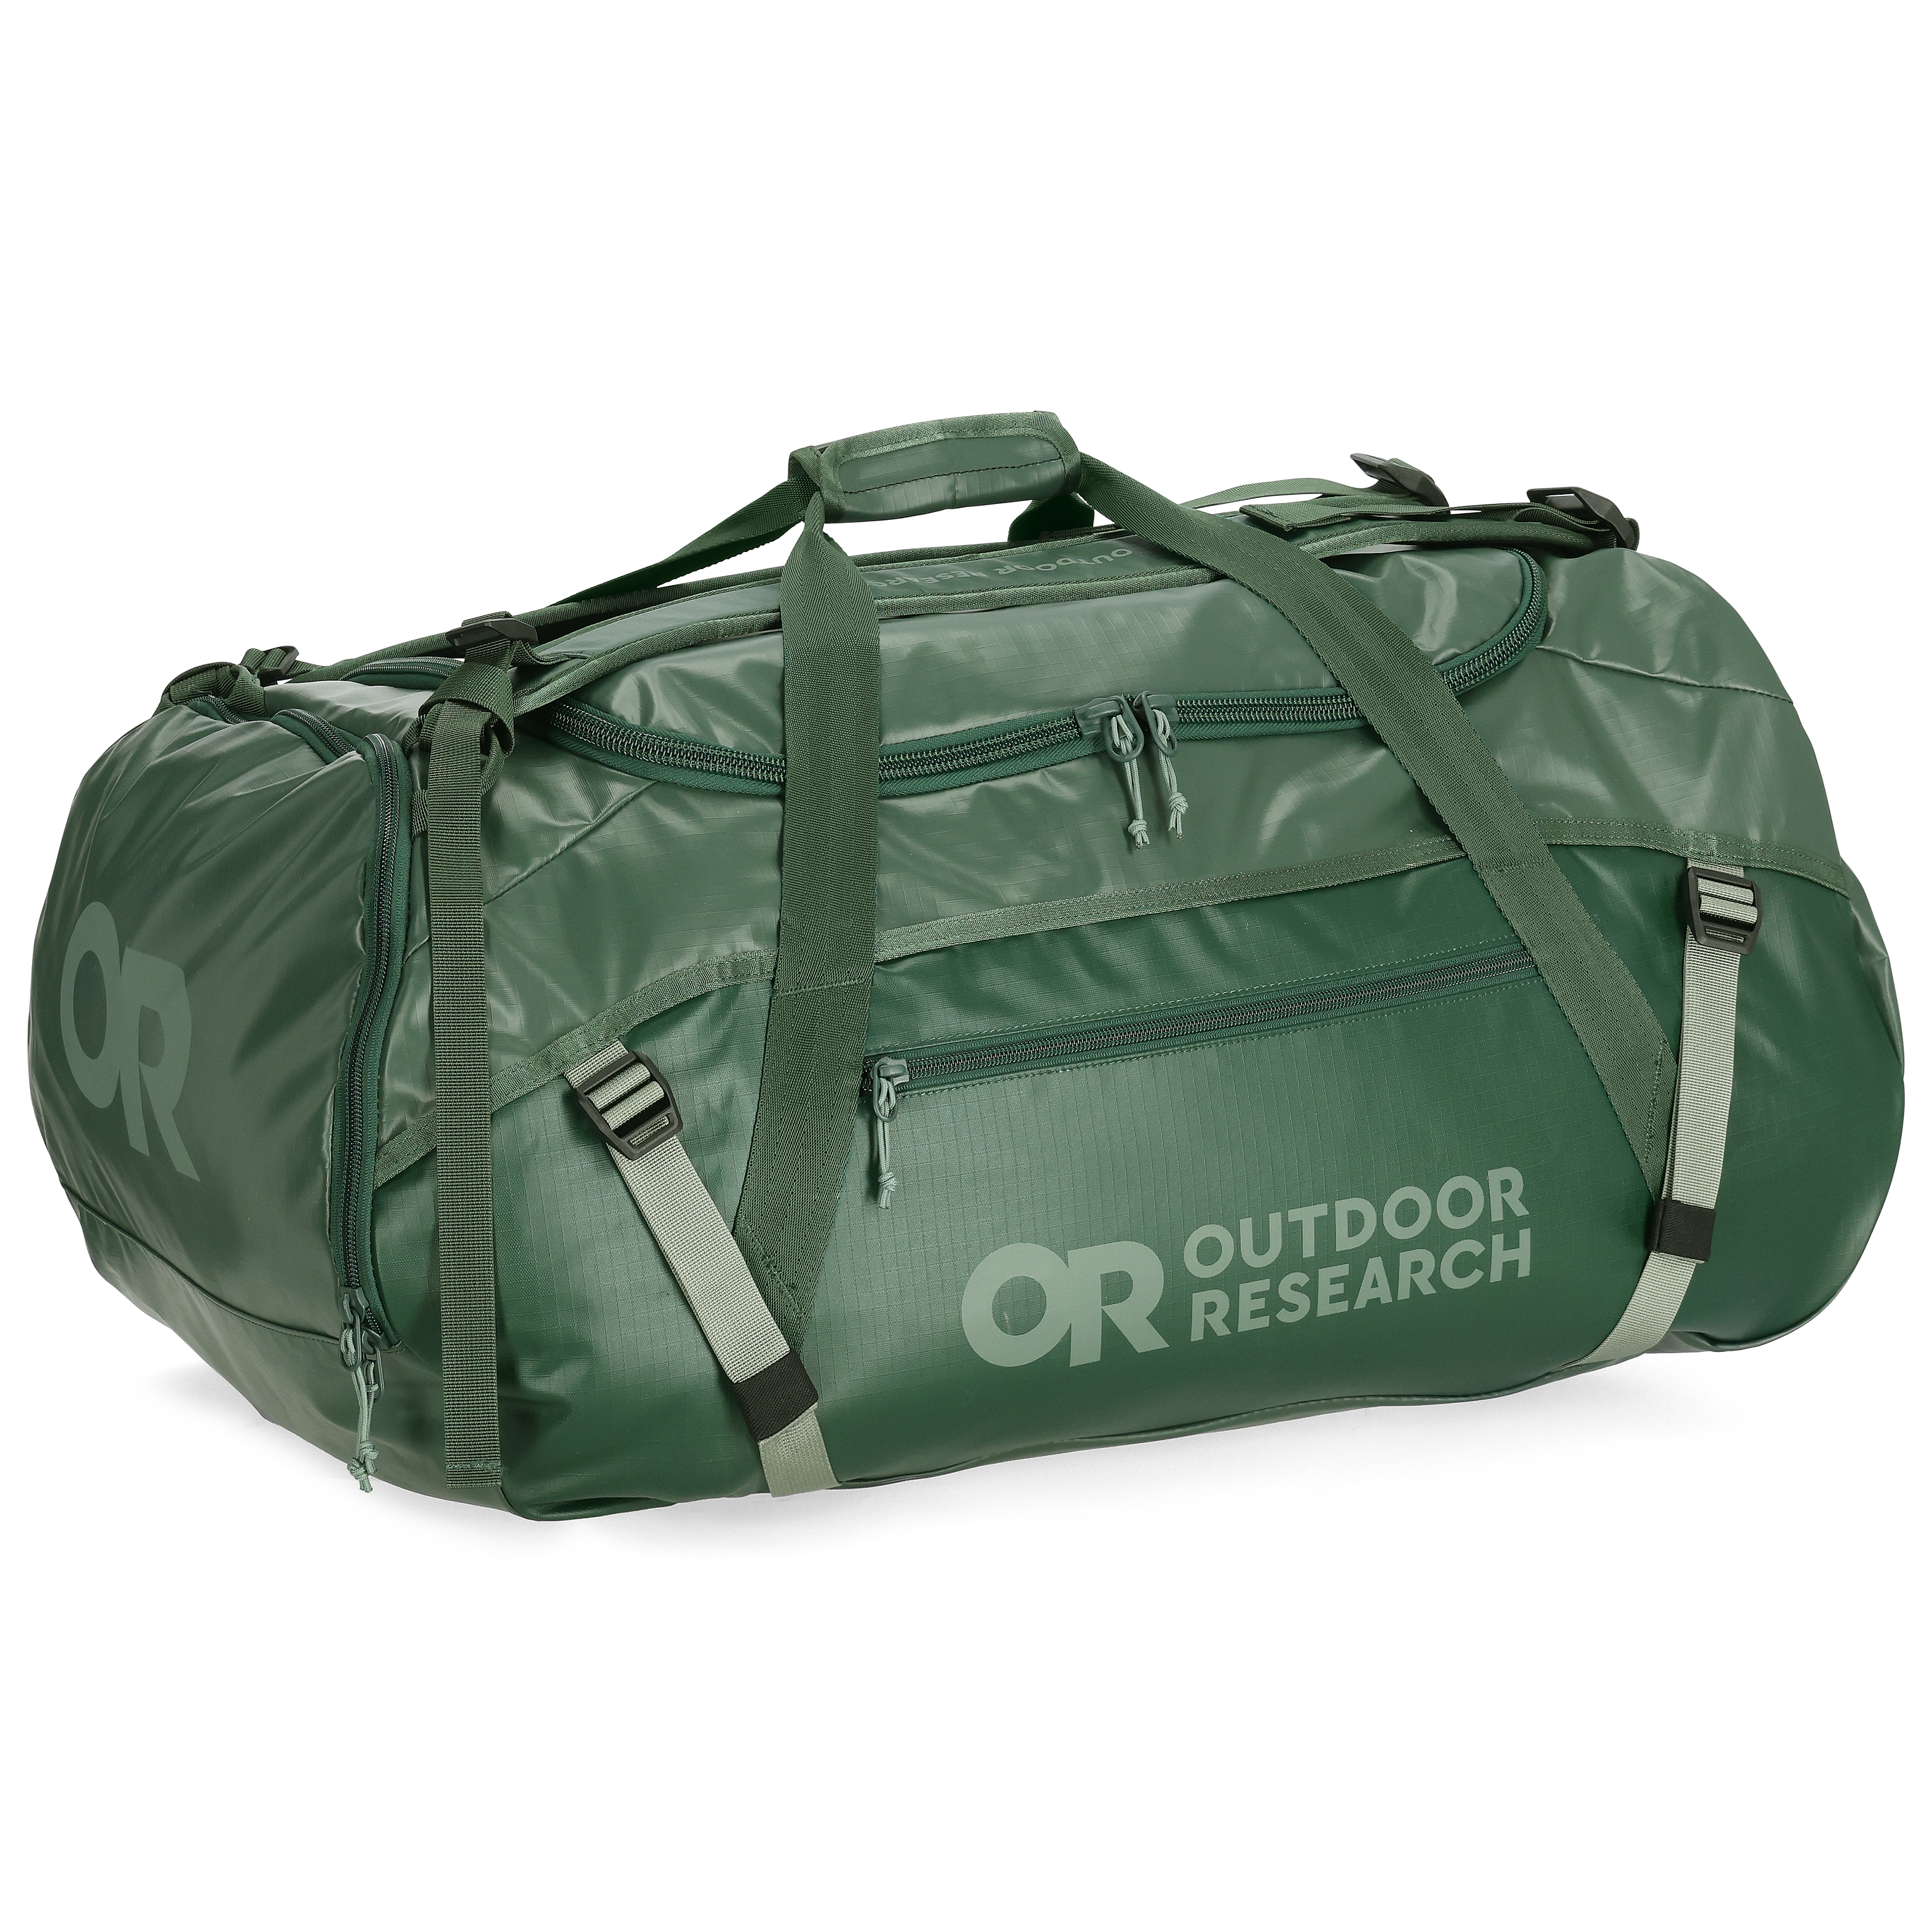 Outdoor Research Carryout Duffel 80L Grove